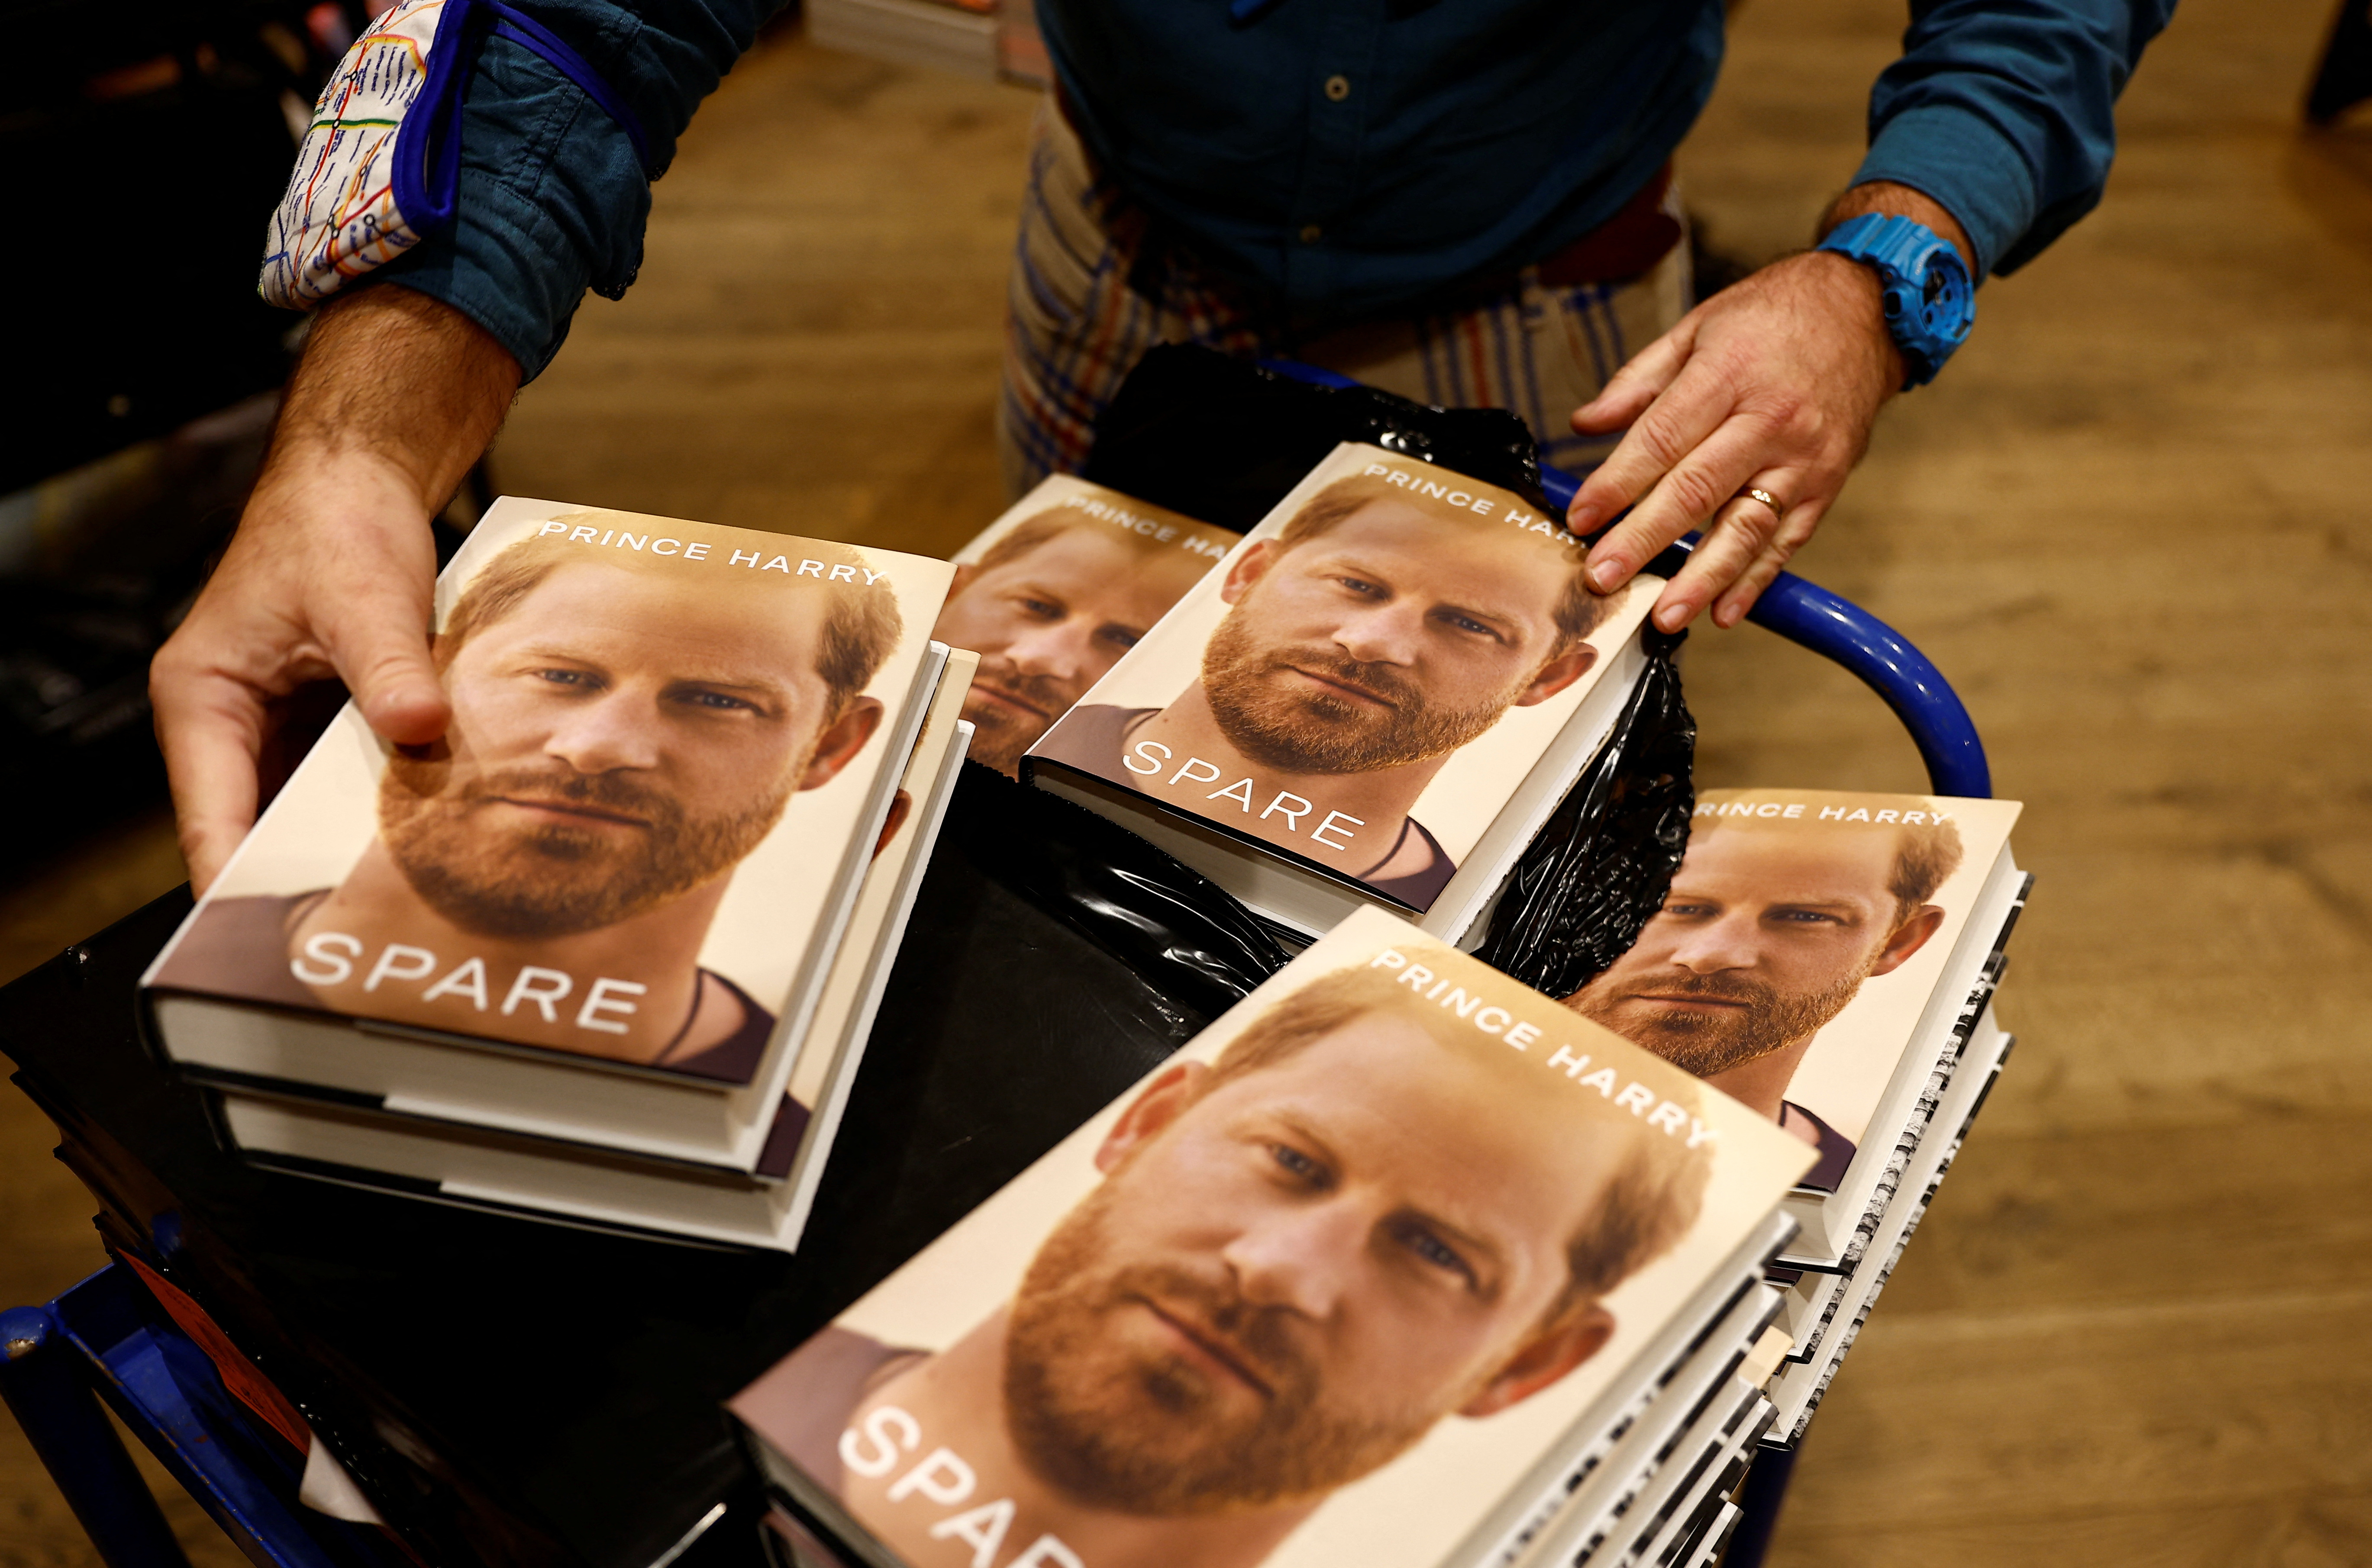 Bookshop staff stack books from Britain's Prince Harry's autobiography 'Spare' at Waterstones, London, Britain on January 10, 2023 (Reuters)